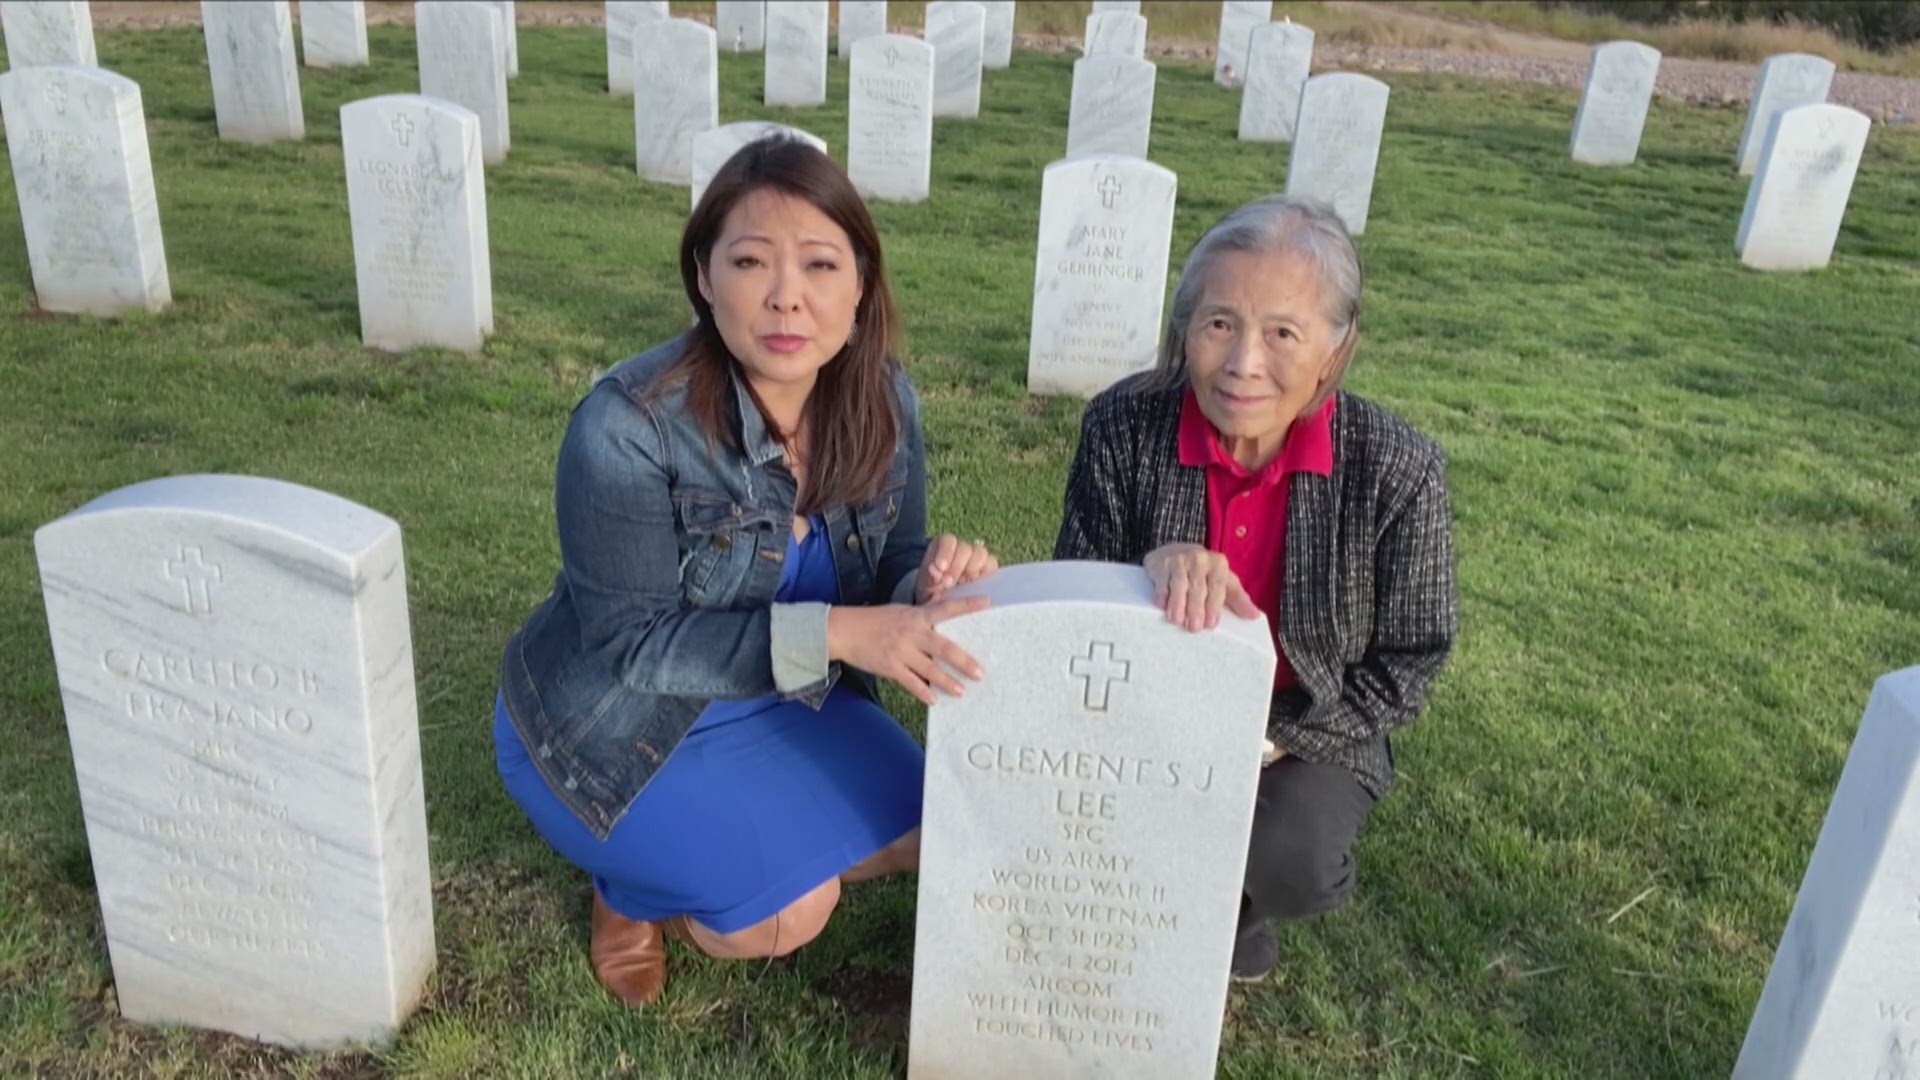 News 8's Marcella Lee explains how you can take part in honoring the nation's fallen heroes.